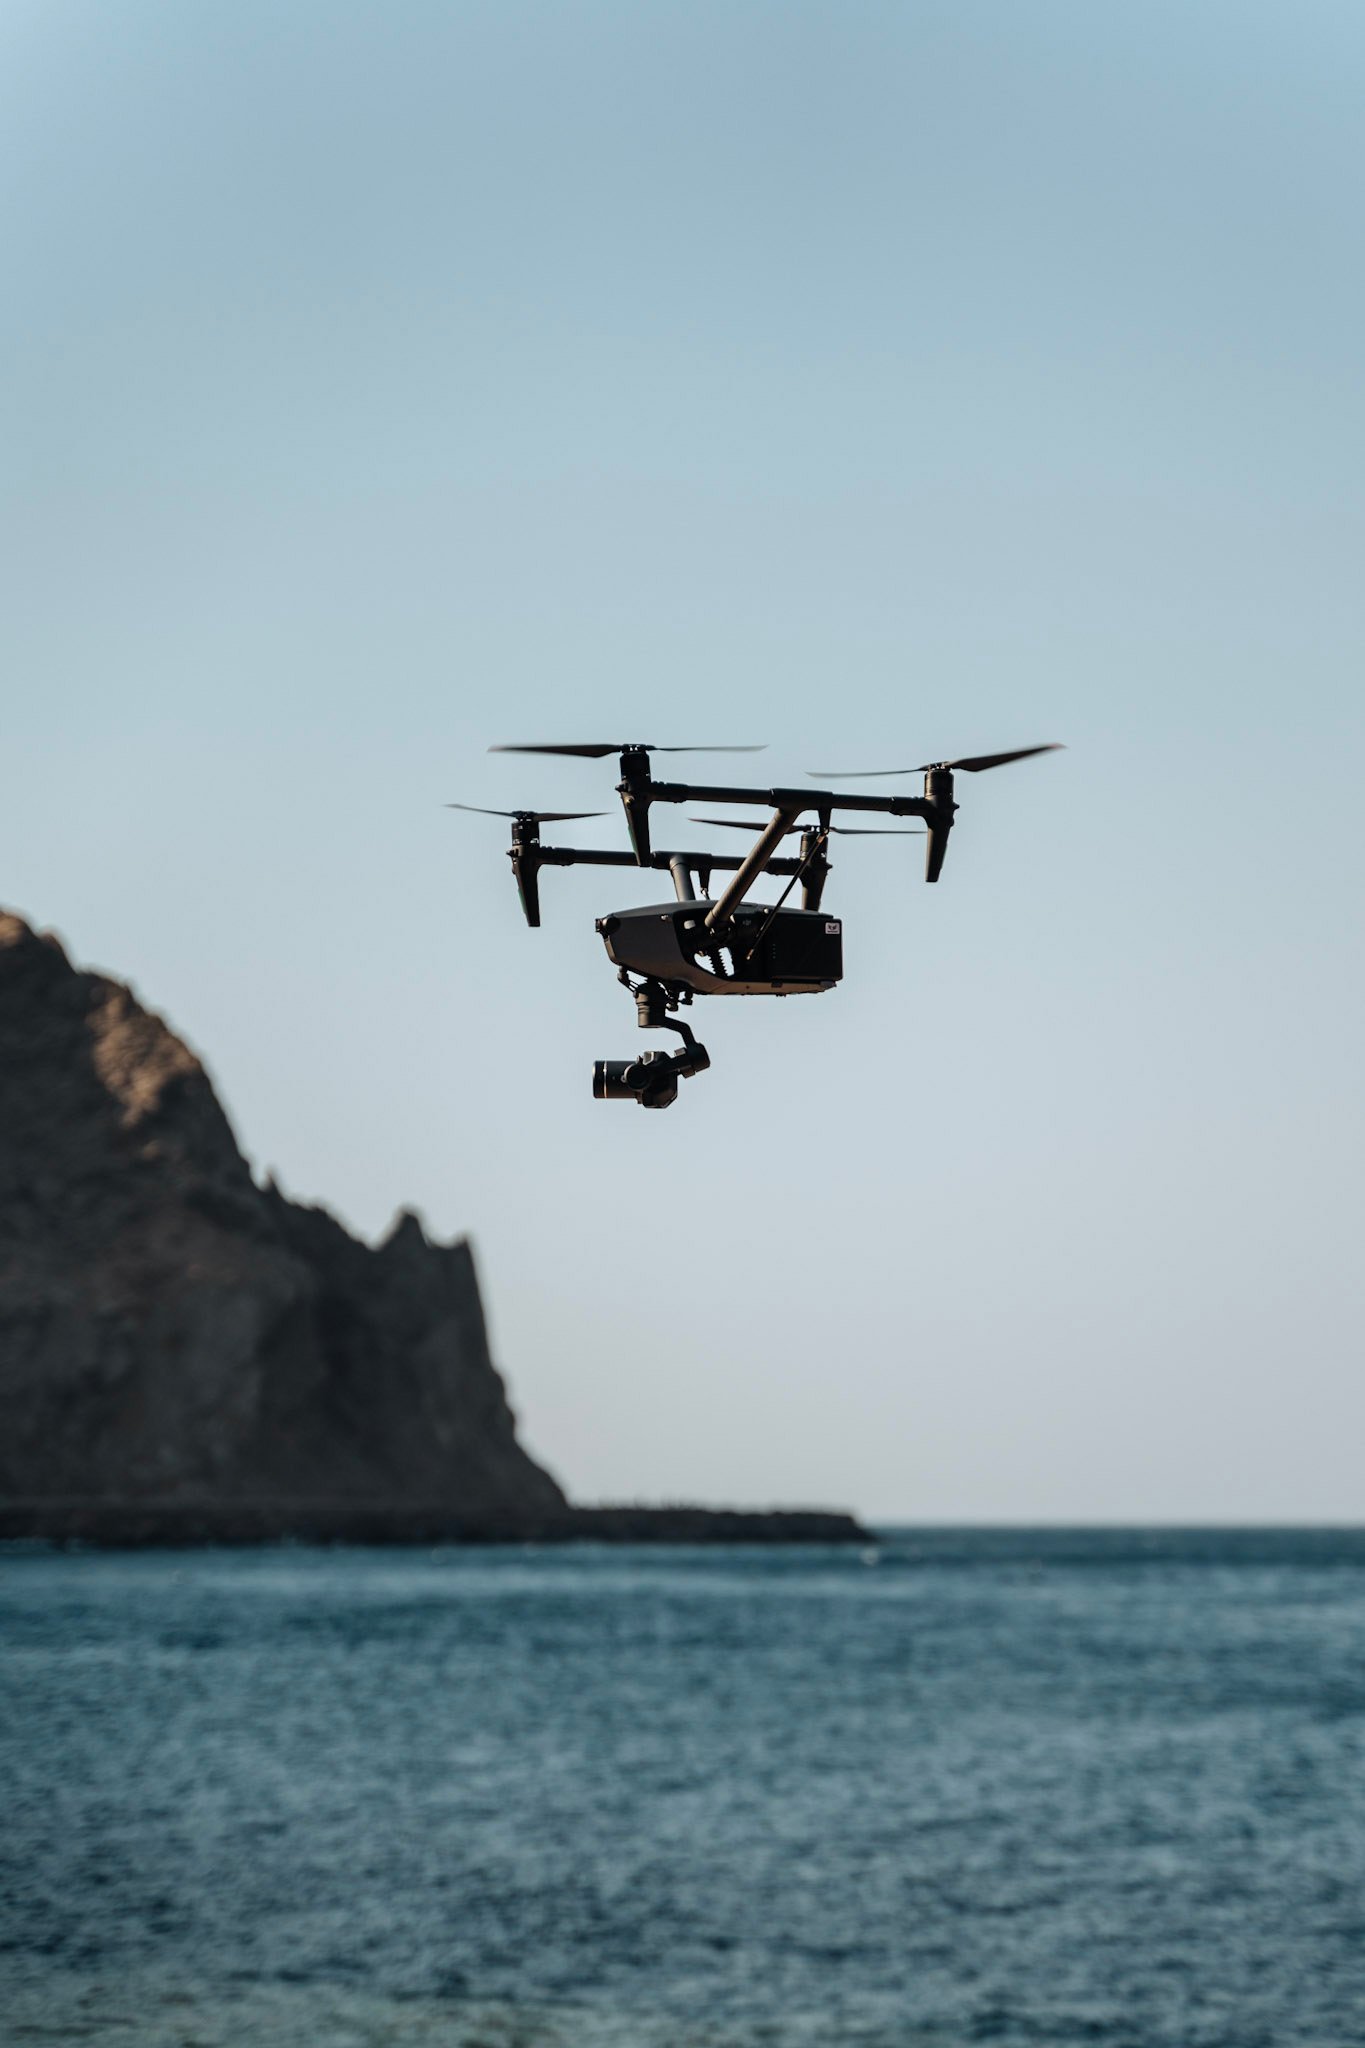 Inspire 3 drone flying over the sea, renowned for its stunning aerial imagery up to 8k. A top choice for filmmakers worldwide.